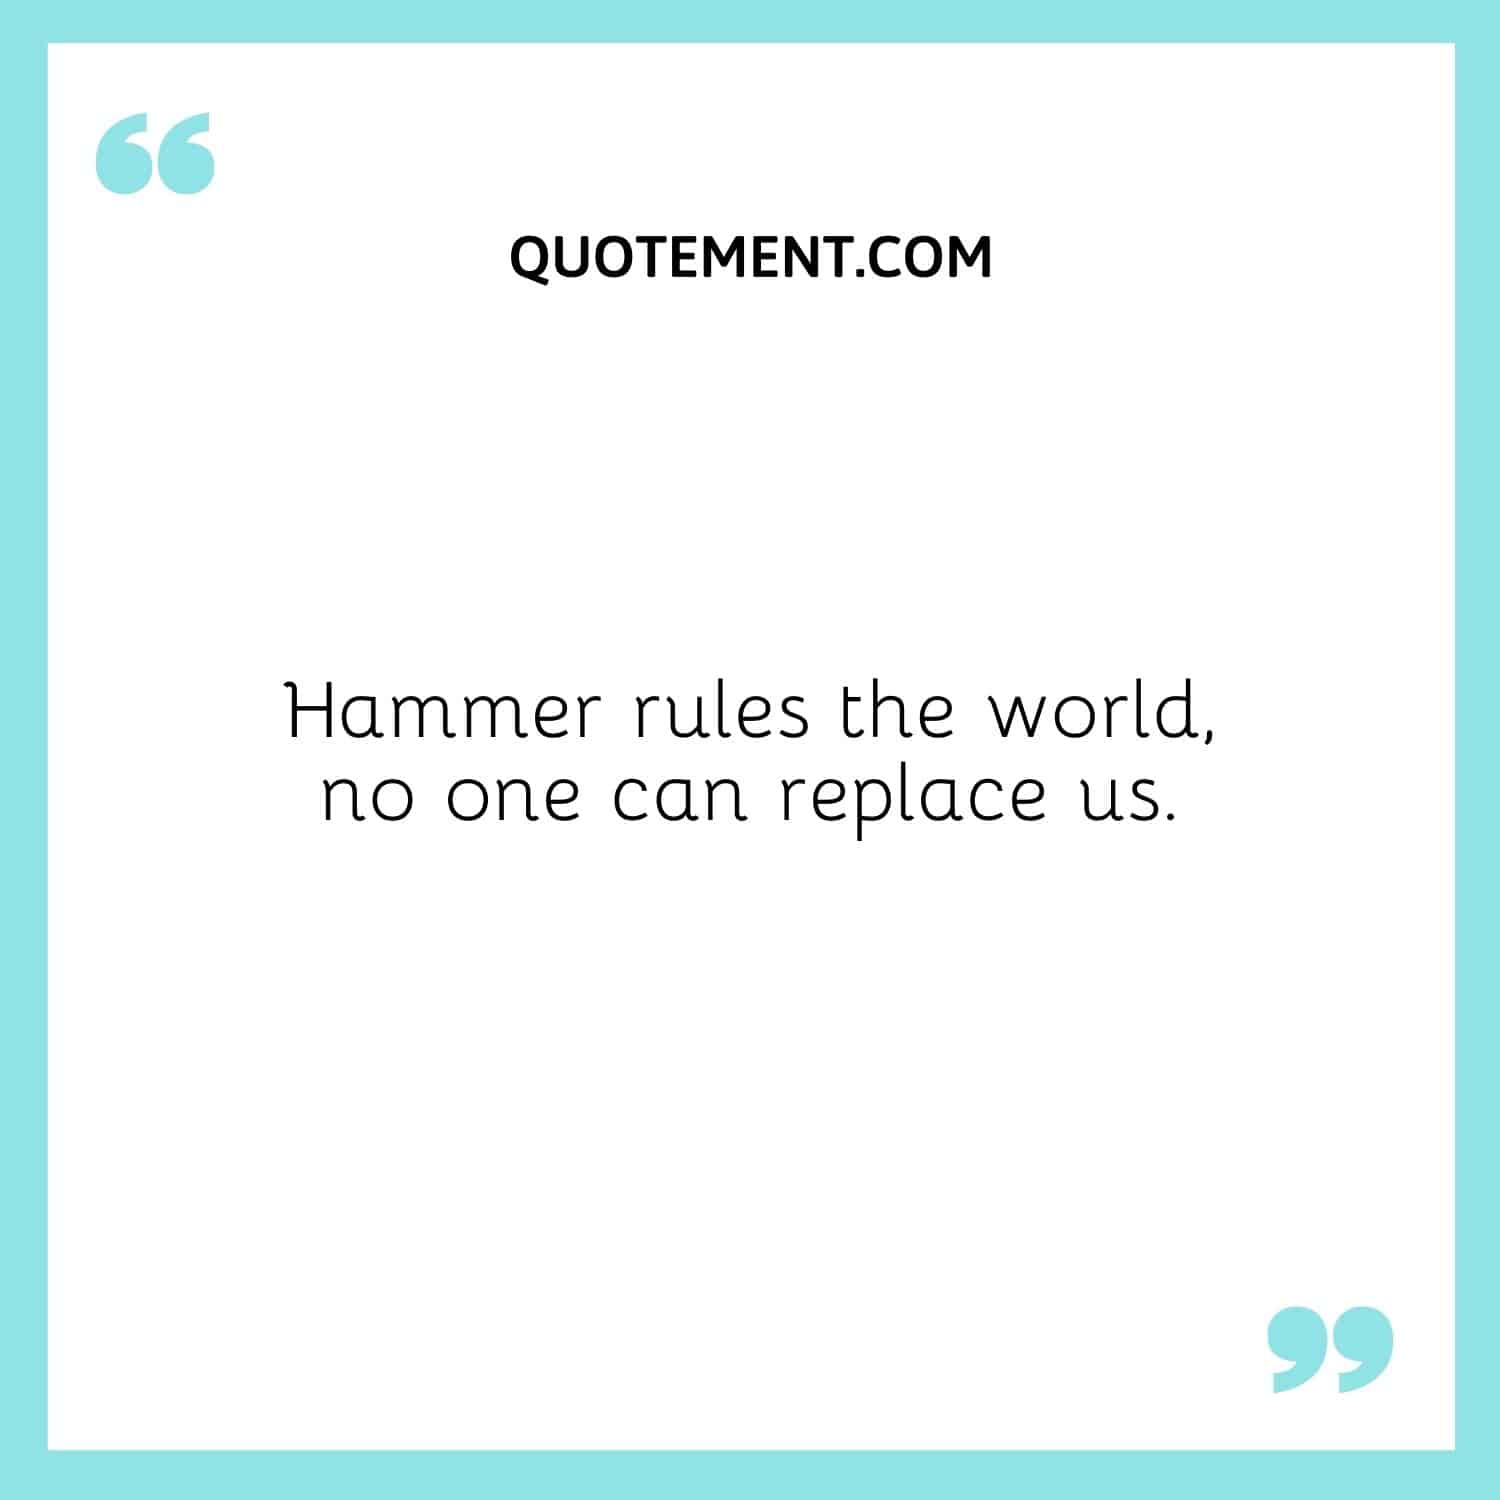 Hammer rules the world, no one can replace us.